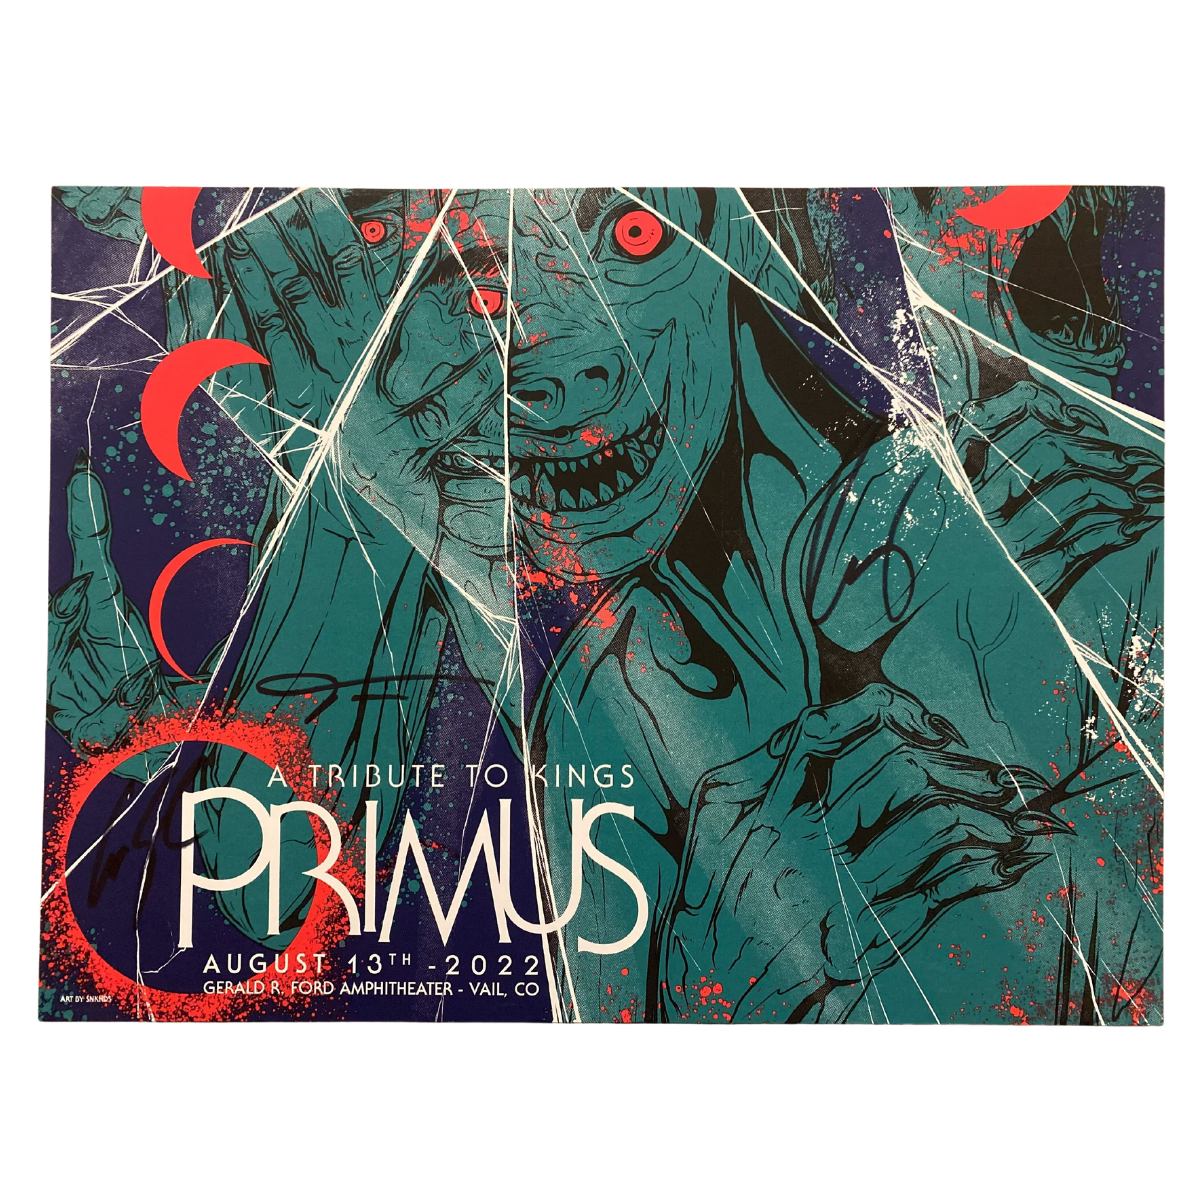 Primus – August 13, 2021 – Vail, CO Poster